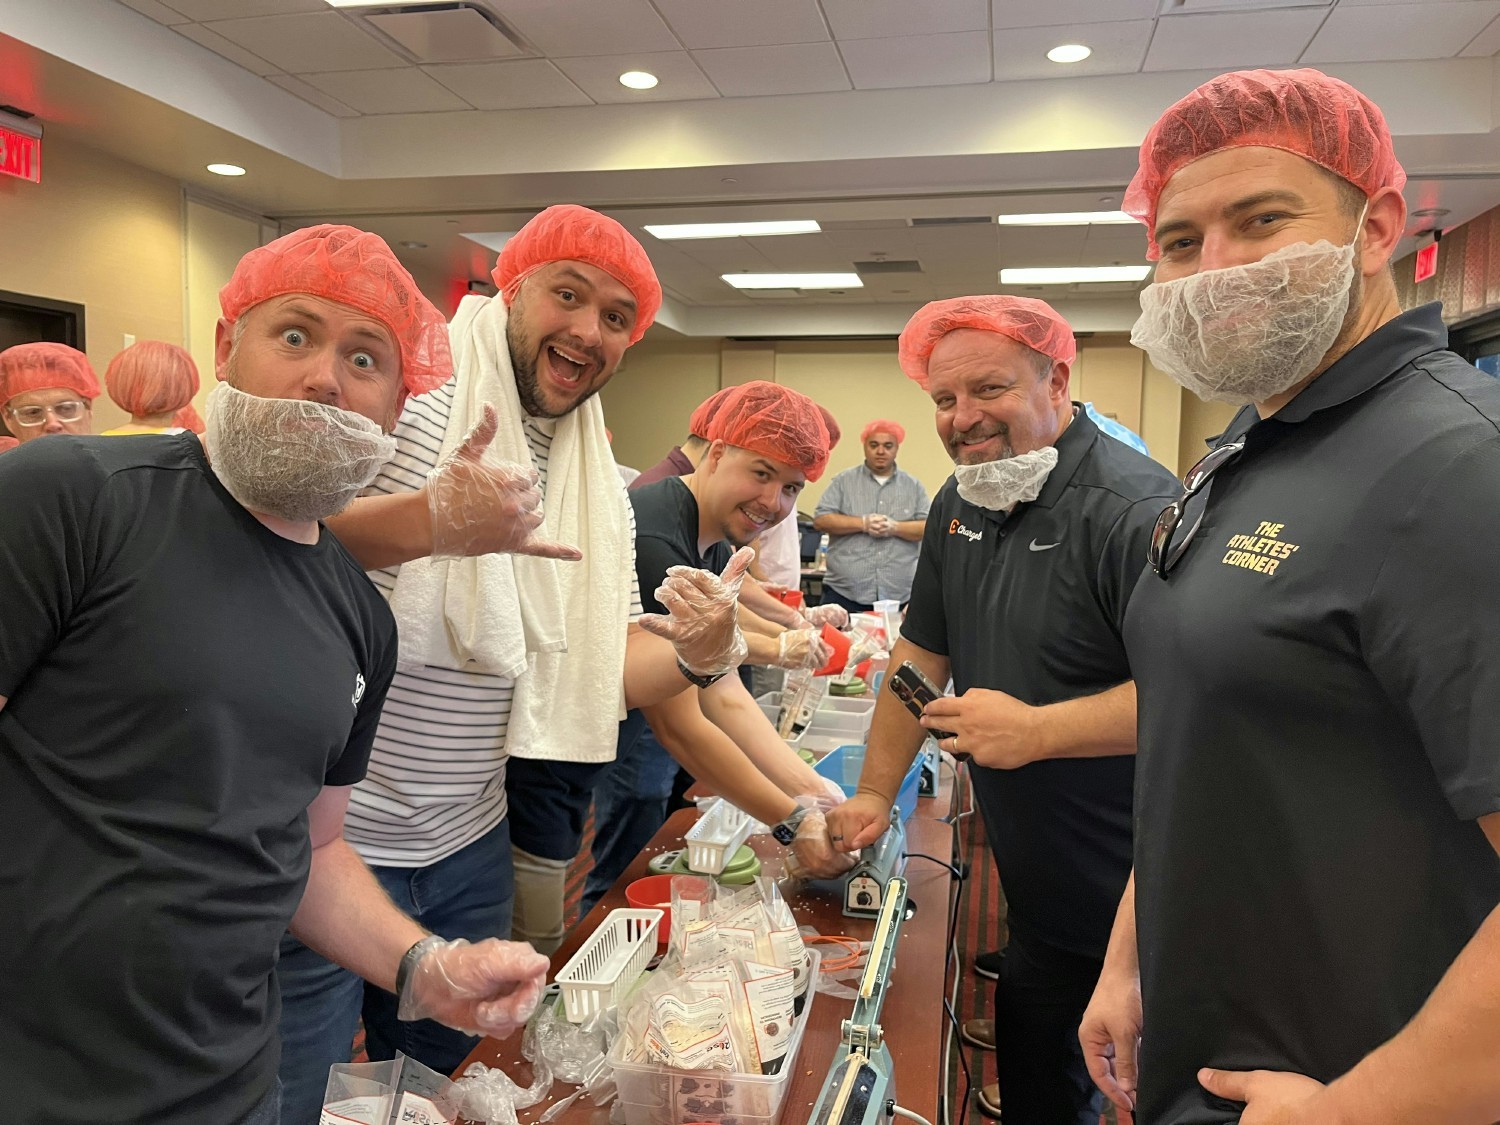 The US team packing 4000 meals for Rise Against Hunger